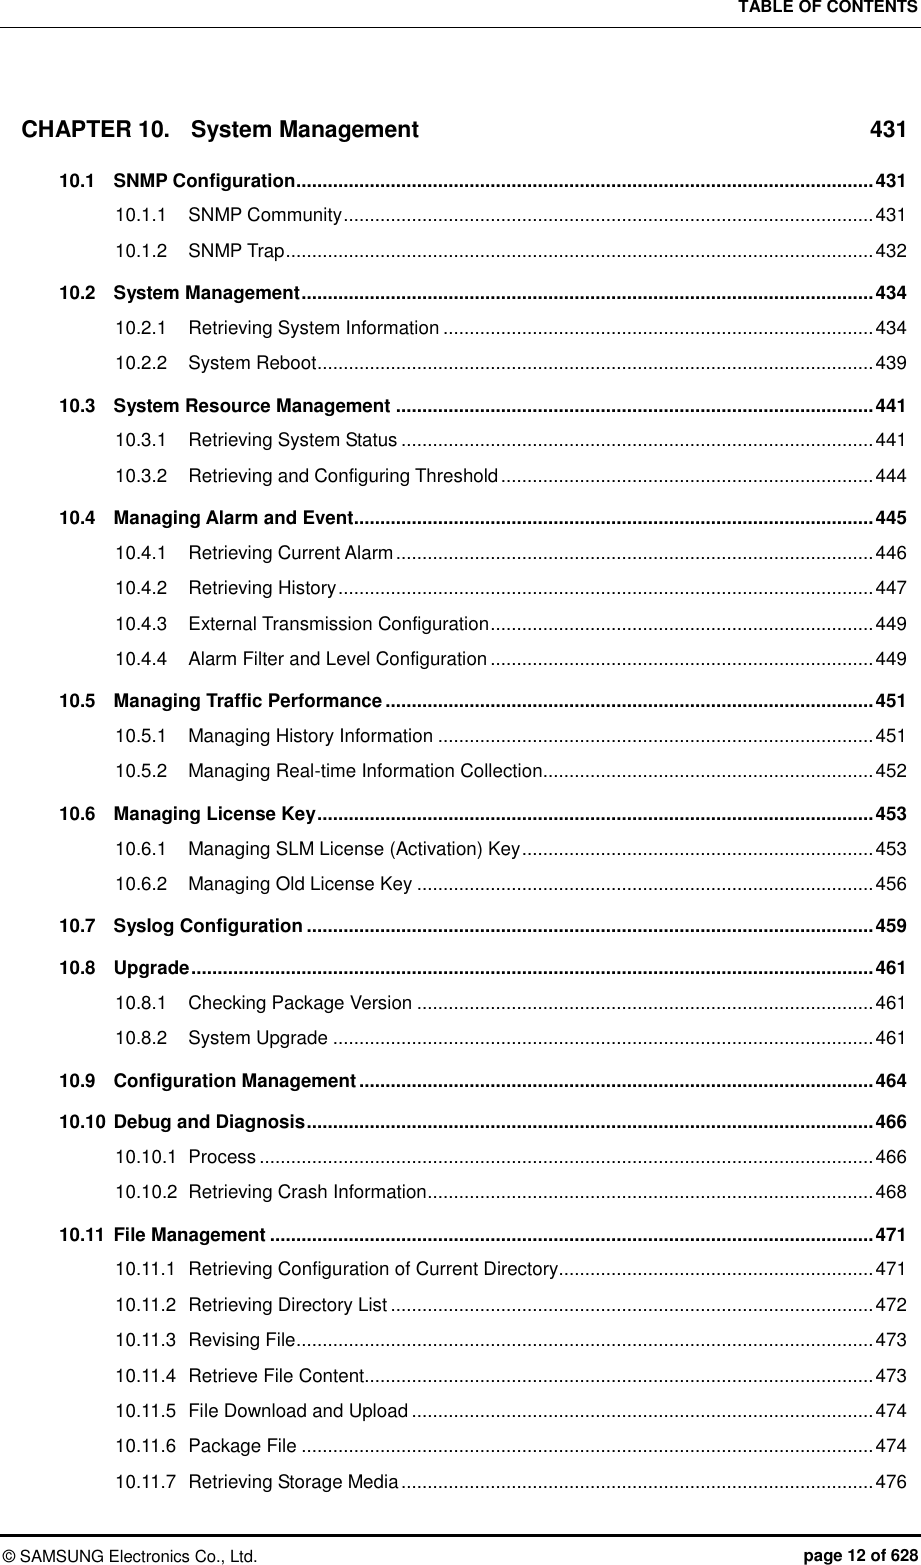 TABLE OF CONTENTS ©  SAMSUNG Electronics Co., Ltd.  page 12 of 628 CHAPTER 10. System Management  431 10.1 SNMP Configuration .............................................................................................................. 431 10.1.1 SNMP Community ..................................................................................................... 431 10.1.2 SNMP Trap ................................................................................................................ 432 10.2 System Management ............................................................................................................. 434 10.2.1 Retrieving System Information .................................................................................. 434 10.2.2 System Reboot .......................................................................................................... 439 10.3 System Resource Management ........................................................................................... 441 10.3.1 Retrieving System Status .......................................................................................... 441 10.3.2 Retrieving and Configuring Threshold ....................................................................... 444 10.4 Managing Alarm and Event ................................................................................................... 445 10.4.1 Retrieving Current Alarm ........................................................................................... 446 10.4.2 Retrieving History ...................................................................................................... 447 10.4.3 External Transmission Configuration ......................................................................... 449 10.4.4 Alarm Filter and Level Configuration ......................................................................... 449 10.5 Managing Traffic Performance ............................................................................................. 451 10.5.1 Managing History Information ................................................................................... 451 10.5.2 Managing Real-time Information Collection............................................................... 452 10.6 Managing License Key .......................................................................................................... 453 10.6.1 Managing SLM License (Activation) Key ................................................................... 453 10.6.2 Managing Old License Key ....................................................................................... 456 10.7 Syslog Configuration ............................................................................................................ 459 10.8 Upgrade .................................................................................................................................. 461 10.8.1 Checking Package Version ....................................................................................... 461 10.8.2 System Upgrade ....................................................................................................... 461 10.9 Configuration Management .................................................................................................. 464 10.10 Debug and Diagnosis ............................................................................................................ 466 10.10.1  Process ..................................................................................................................... 466 10.10.2 Retrieving Crash Information ..................................................................................... 468 10.11 File Management ................................................................................................................... 471 10.11.1 Retrieving Configuration of Current Directory ............................................................ 471 10.11.2 Retrieving Directory List ............................................................................................ 472 10.11.3 Revising File .............................................................................................................. 473 10.11.4 Retrieve File Content................................................................................................. 473 10.11.5 File Download and Upload ........................................................................................ 474 10.11.6 Package File ............................................................................................................. 474 10.11.7 Retrieving Storage Media .......................................................................................... 476 